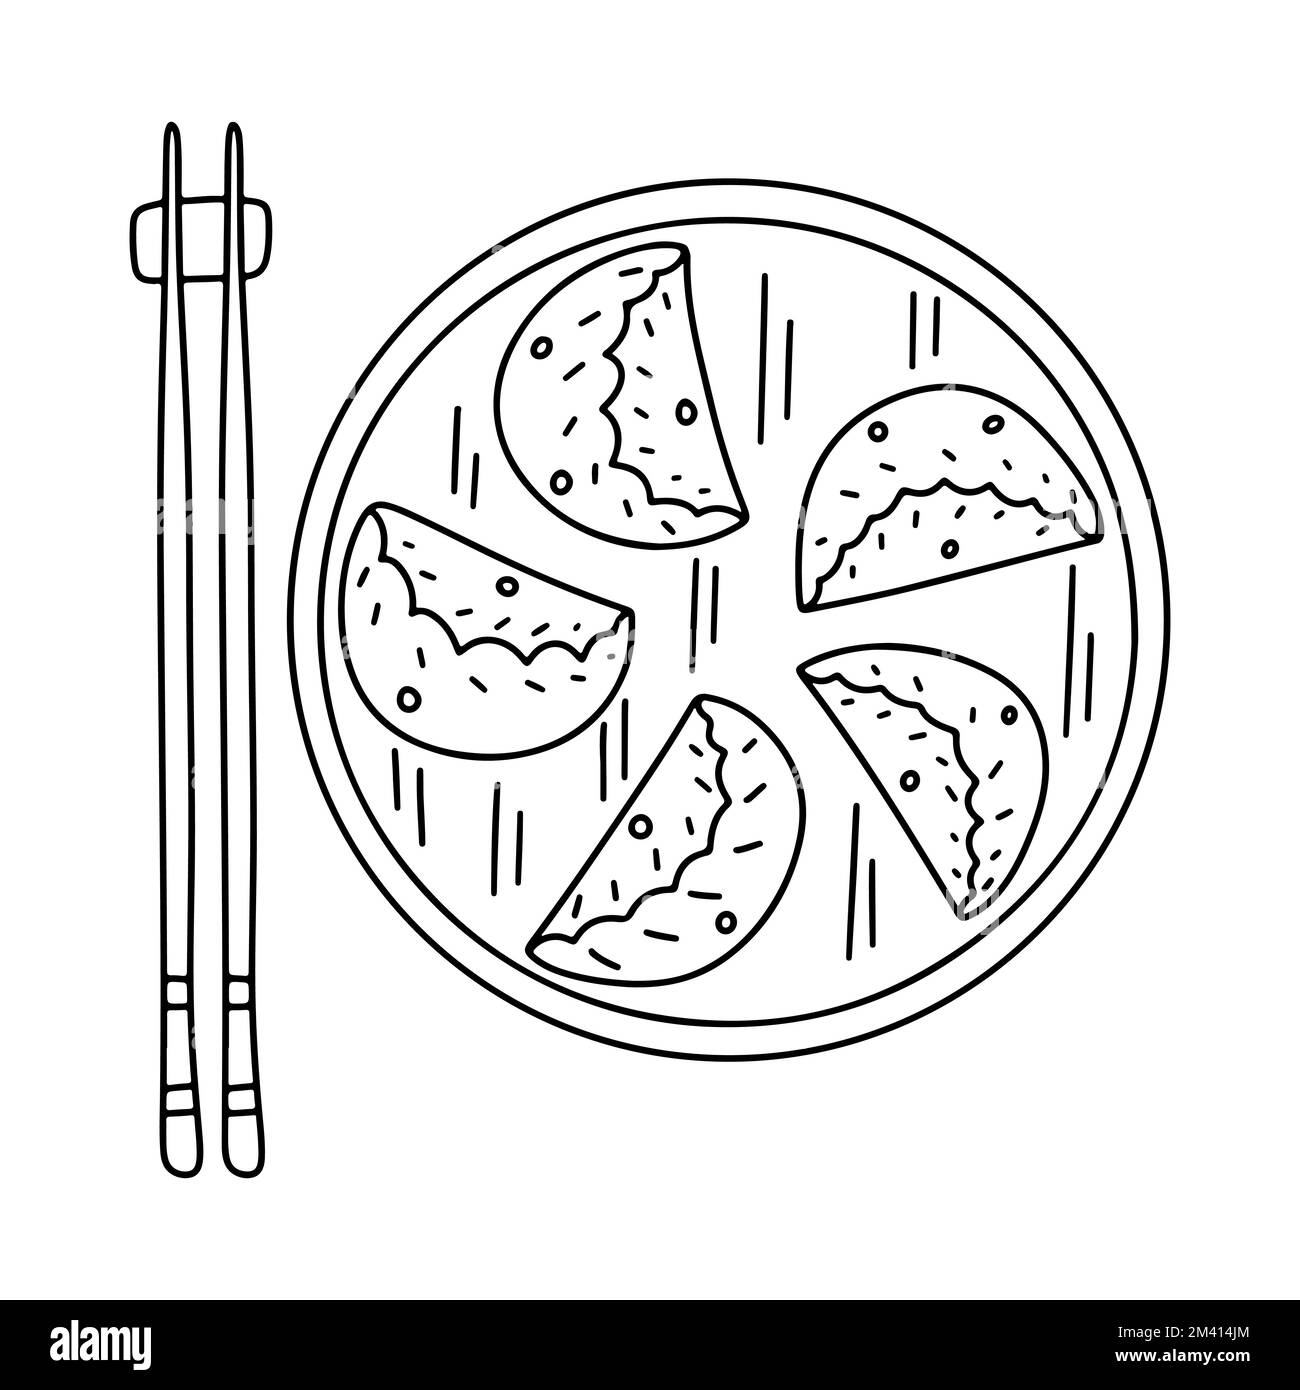 Dim Sum in hand drawn doodle style. Asian food element isolated on white background. Top view. Stock Vector